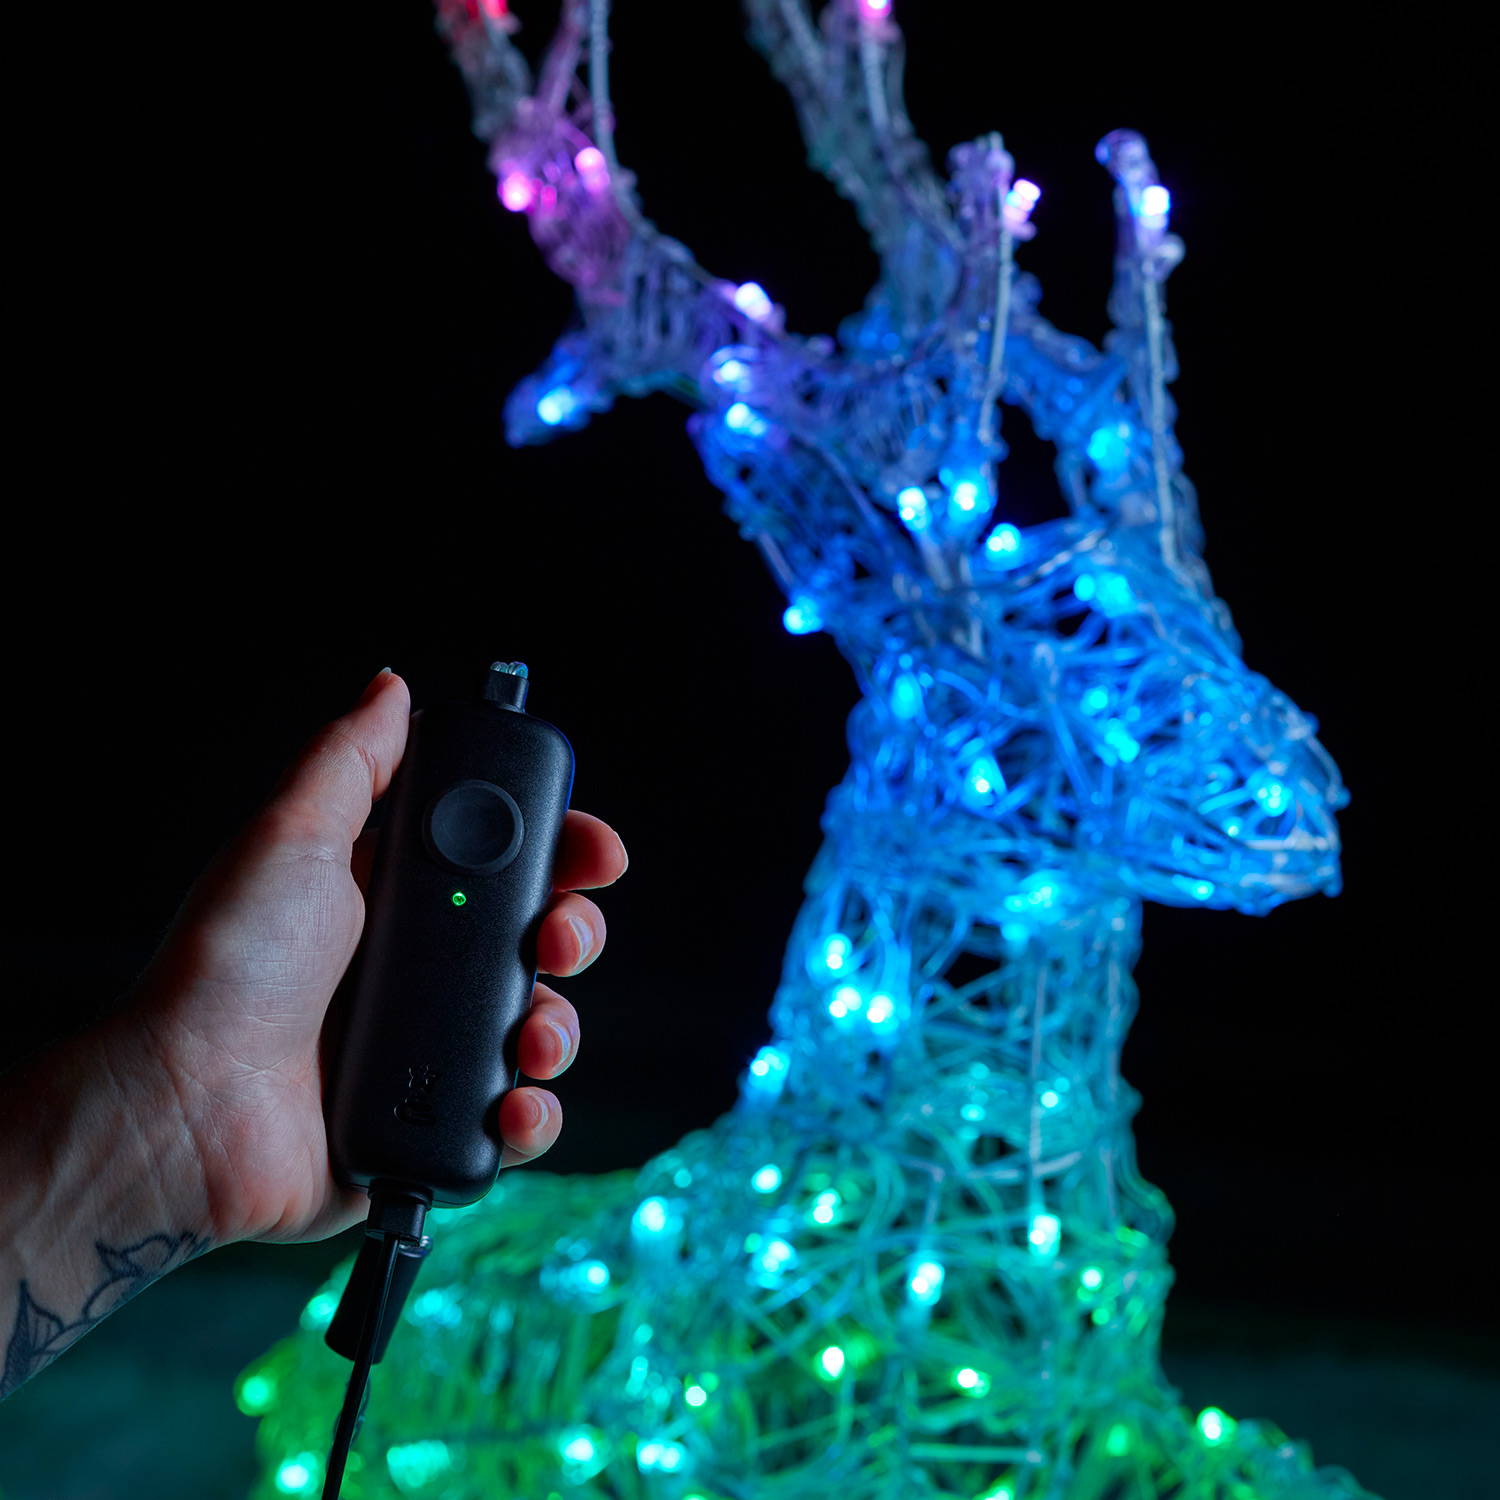 A person connecting their phone with the Twinkly device remote.